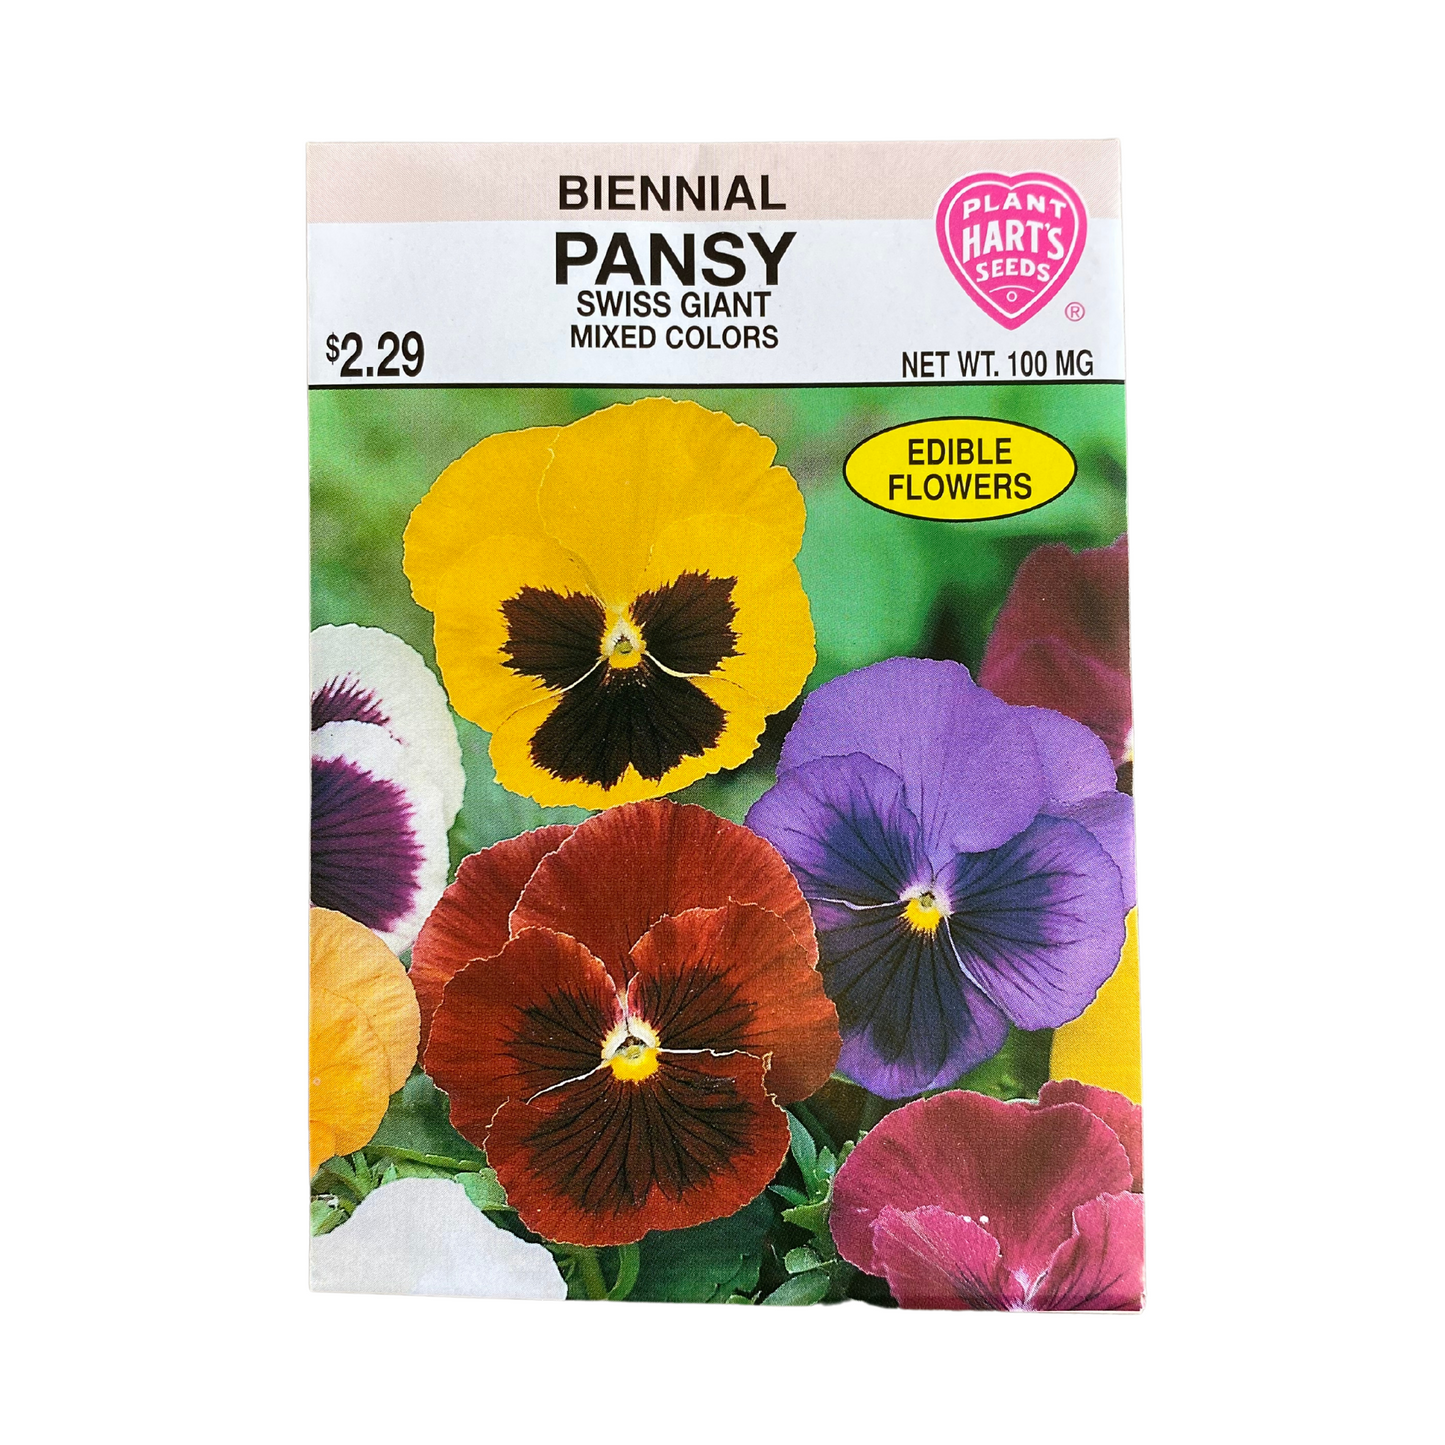 Pansy Swiss Giant